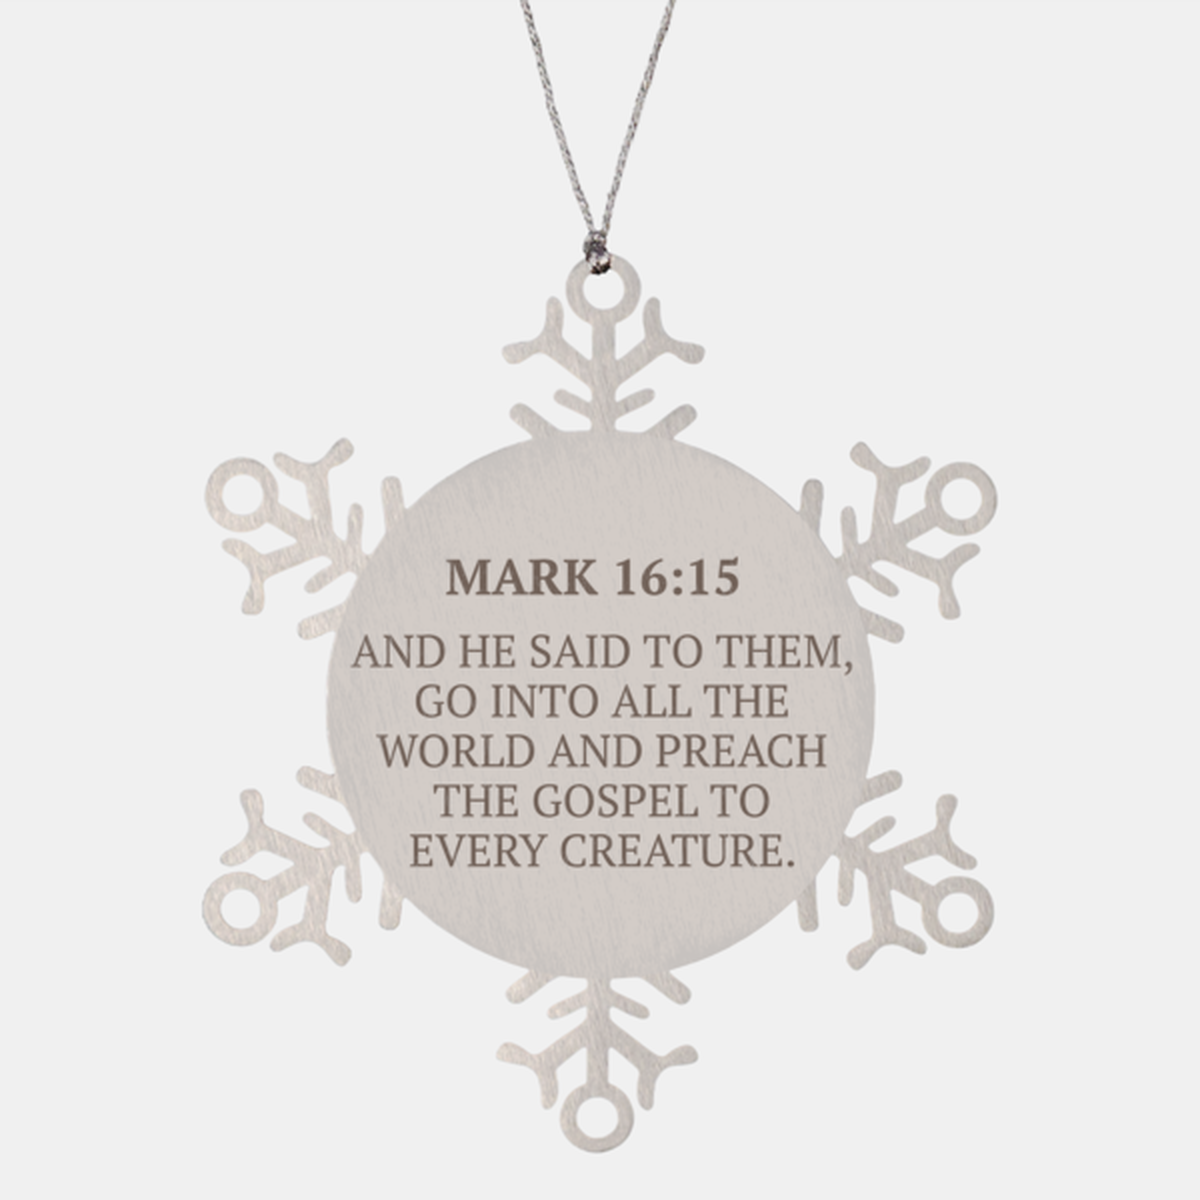 Christian Ornaments For Christmas Tree, And He Said To Them, Go Into All The World, Religious Christmas Decorations, Scripture Ornaments Gifts, Bible Verse Ornament